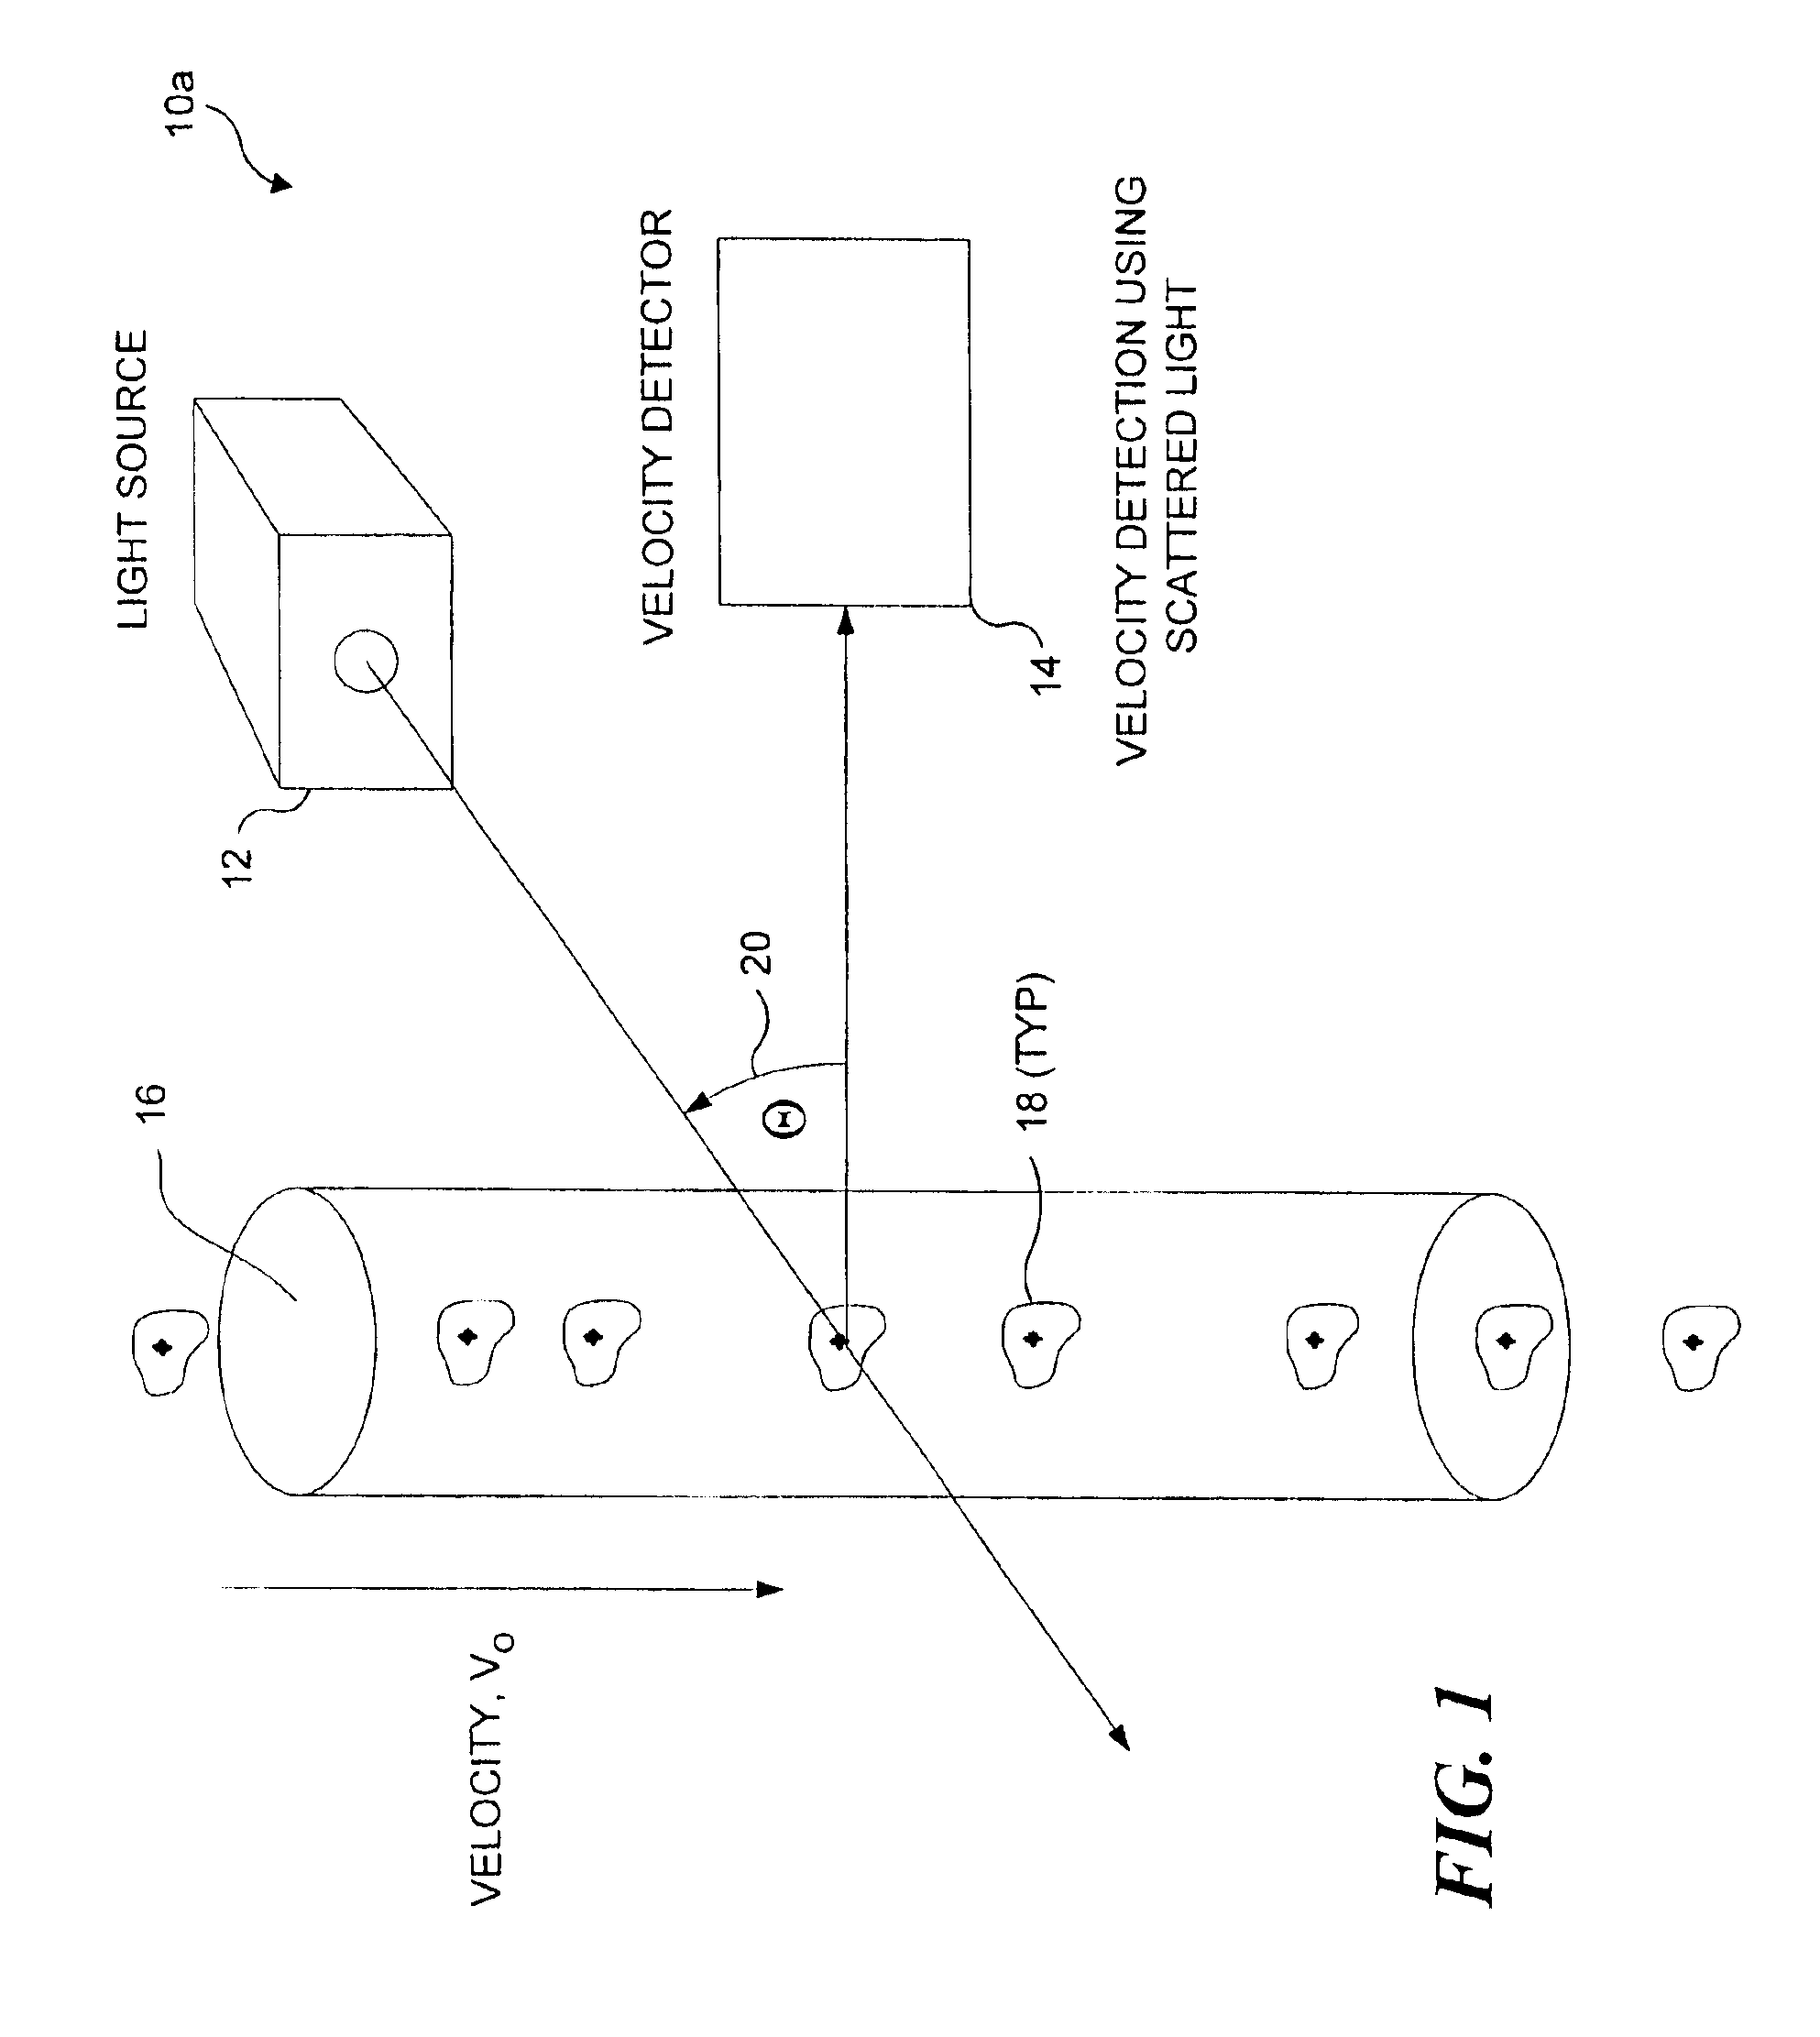 Methods of calibrating an imaging system using calibration beads